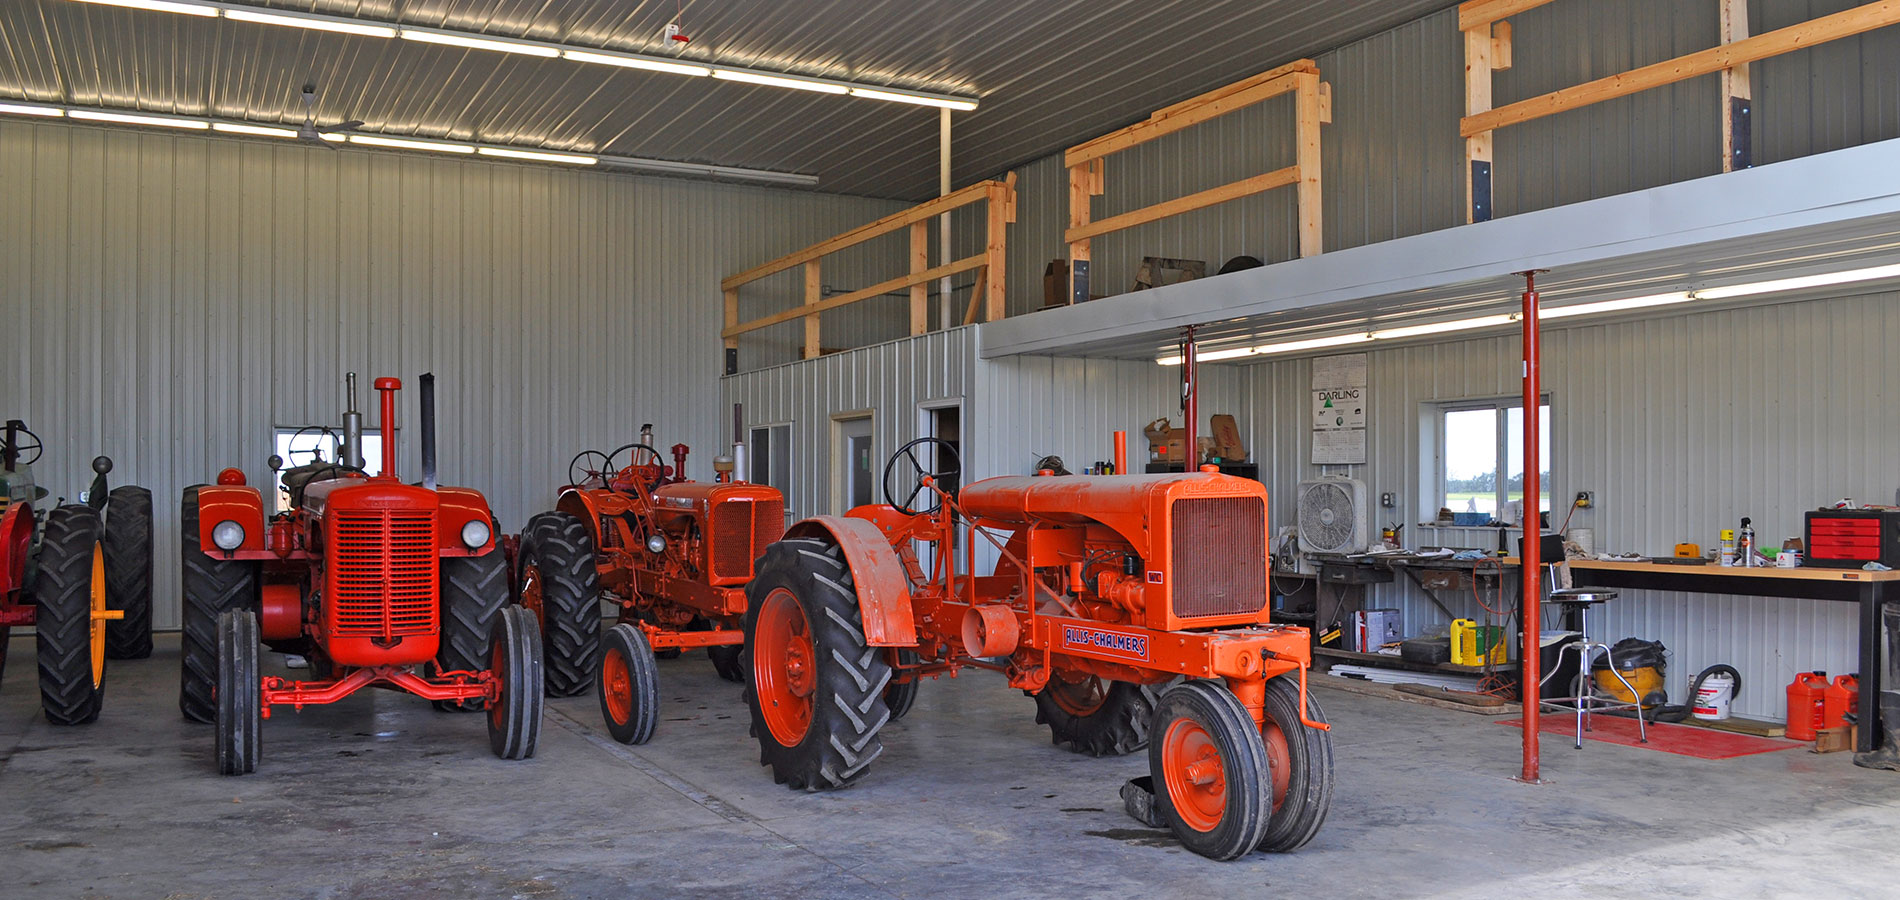 Ag Workshops, Machine Sheds and More